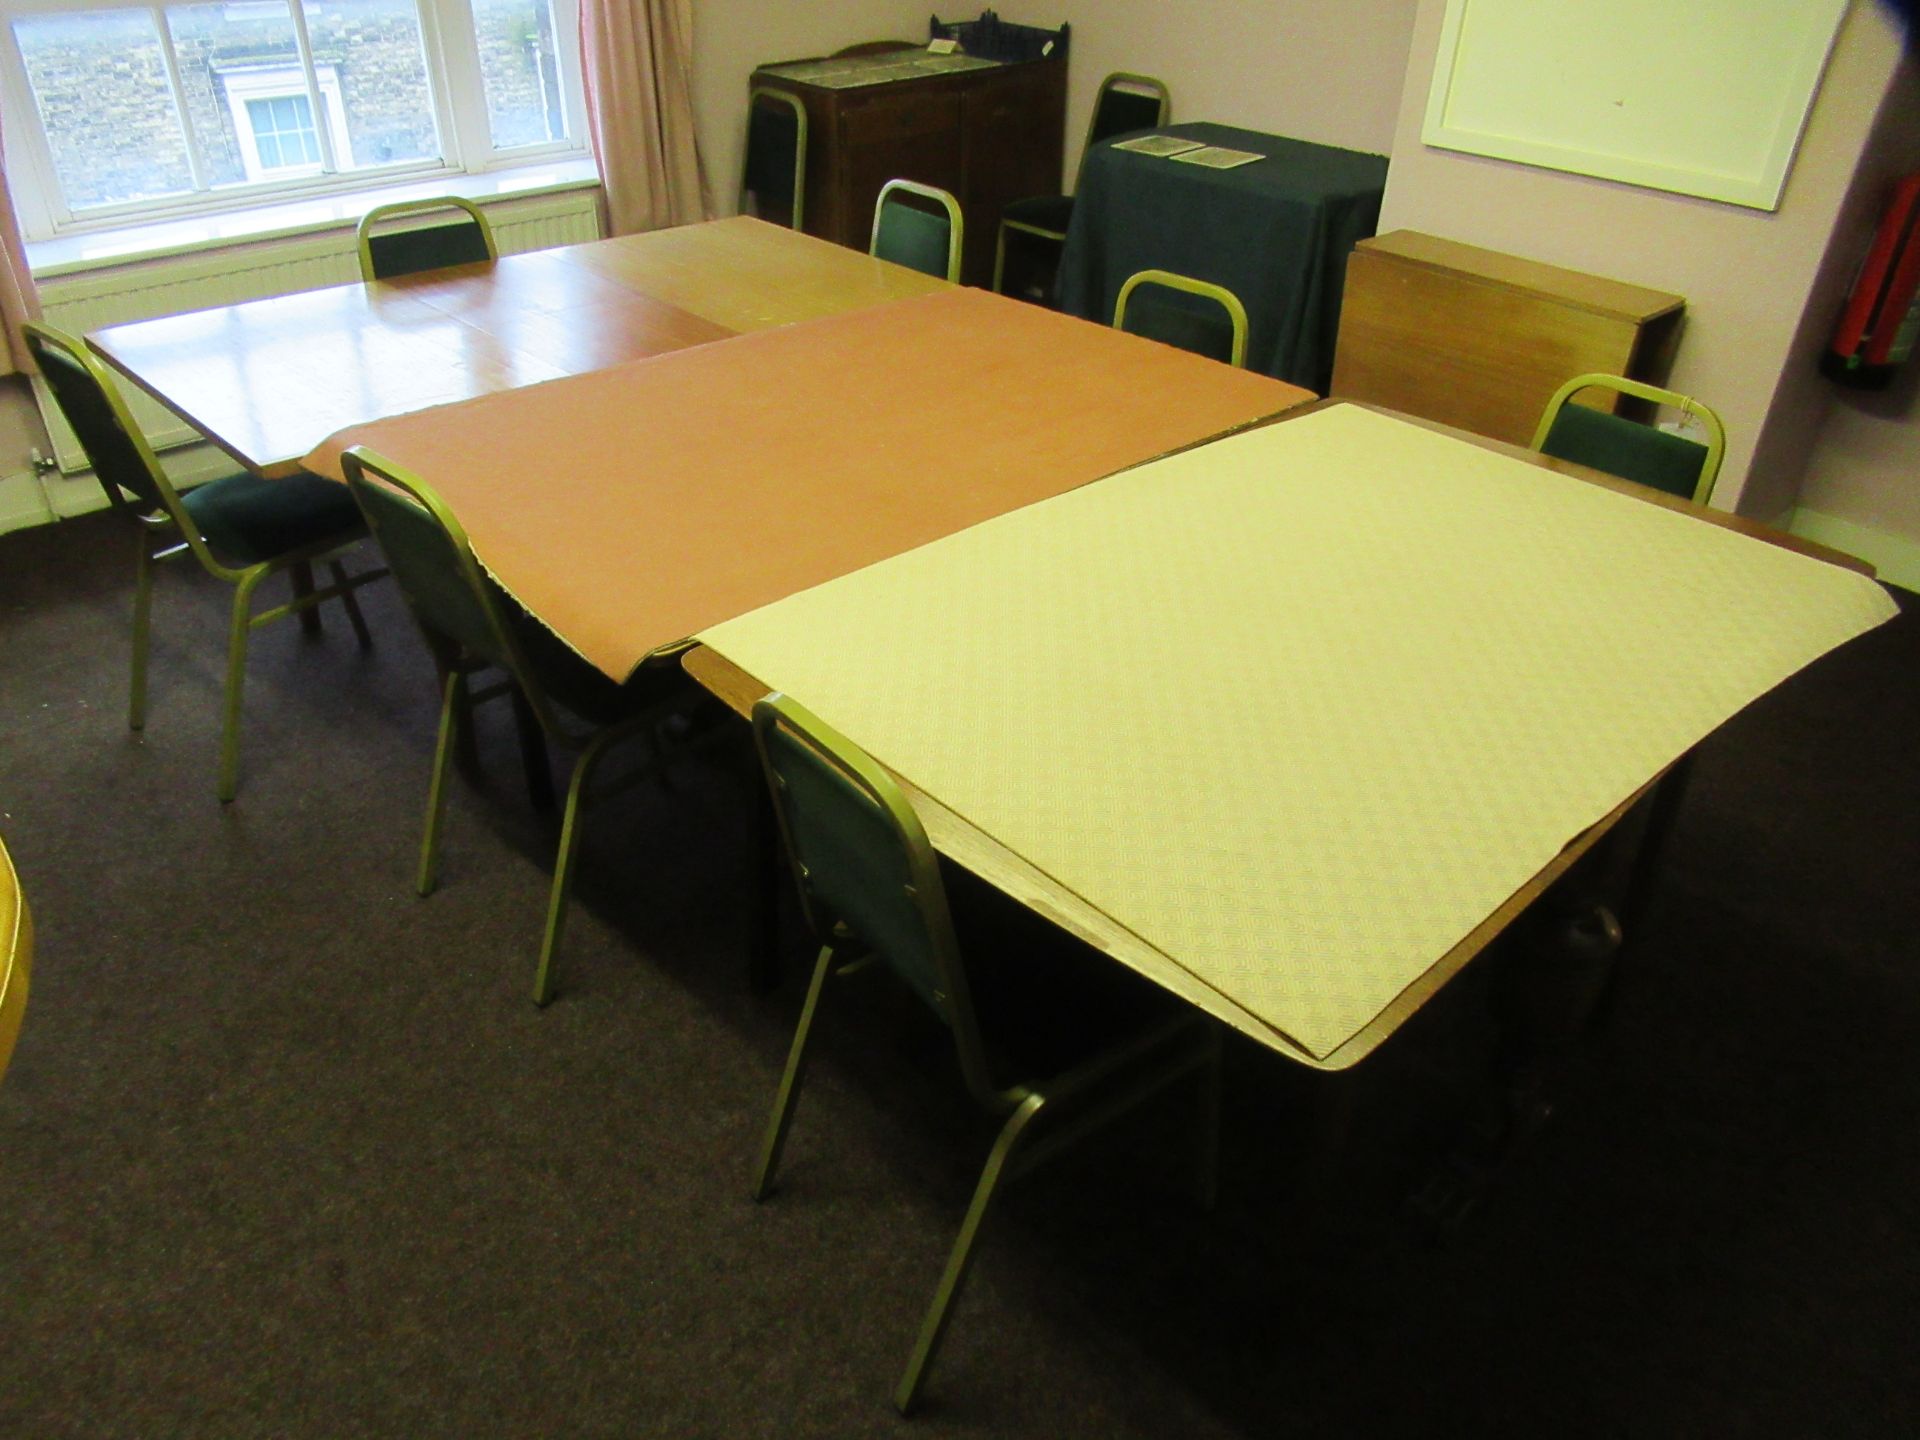 A Selection of tables